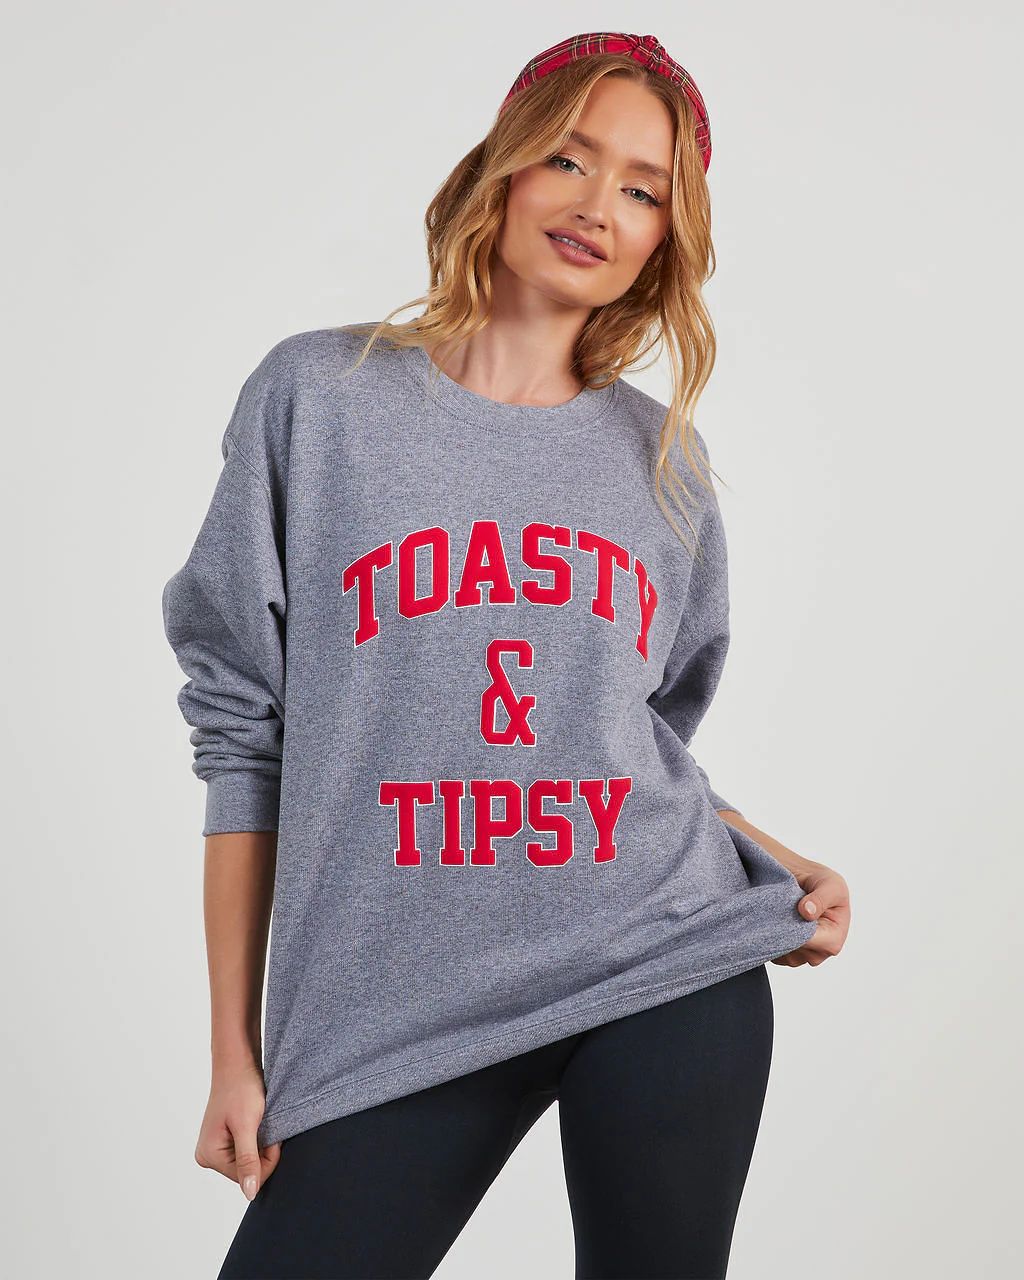 Toasty & Tipsy Oversized Graphic Sweatshirt | VICI Collection